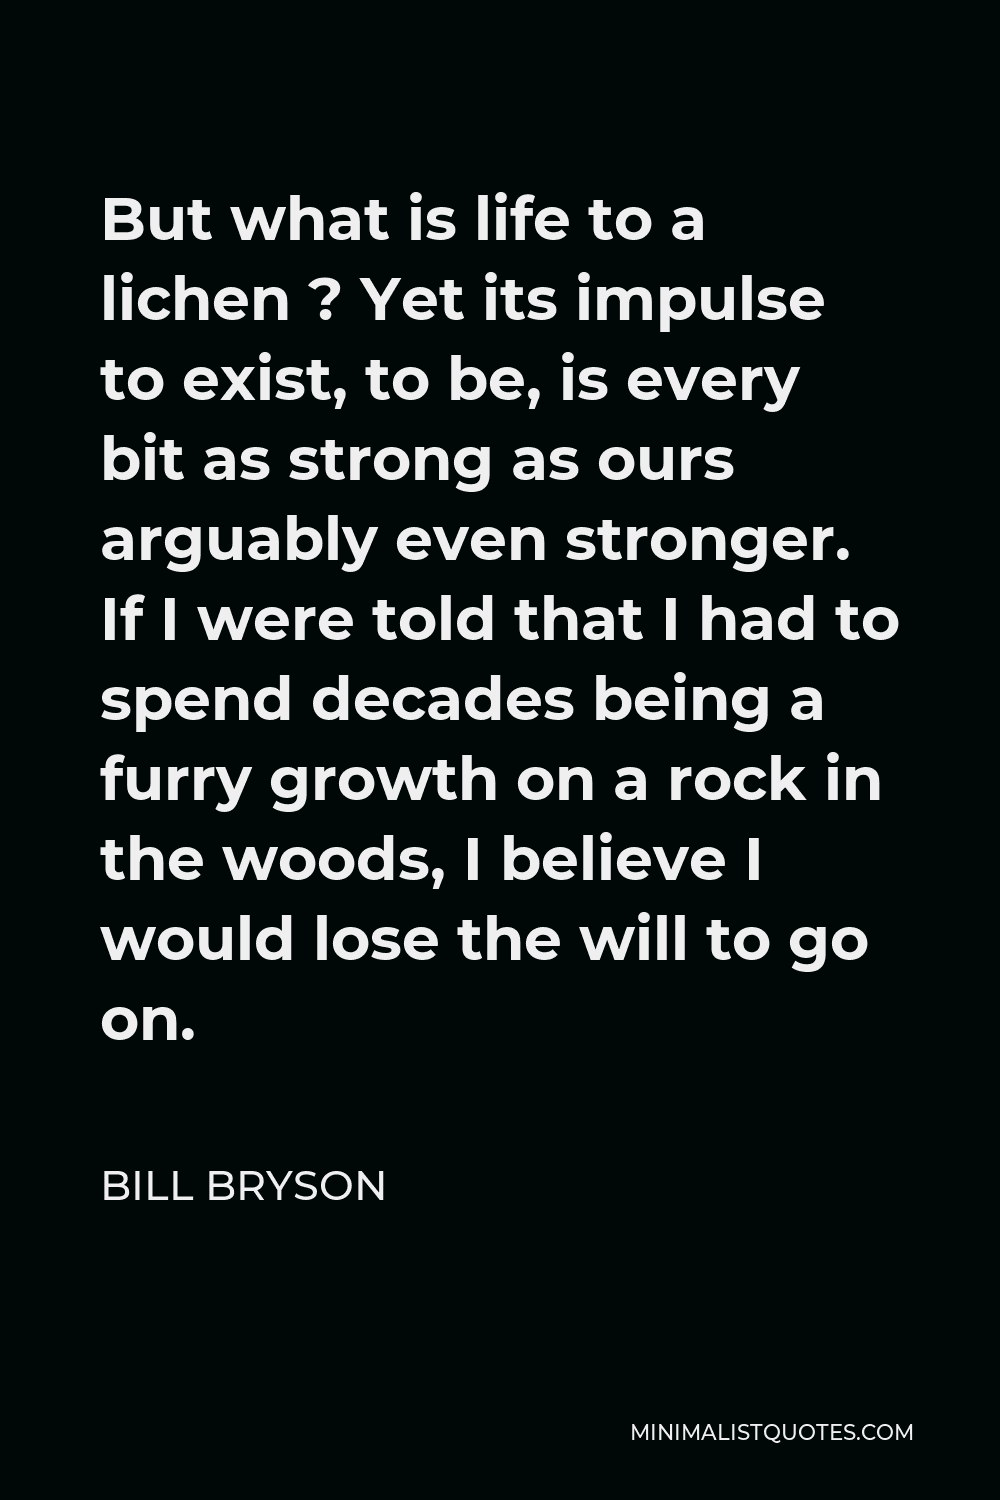 Bill Bryson Quote - But what is life to a lichen ? Yet its impulse to exist, to be, is every bit as strong as ours arguably even stronger. If I were told that I had to spend decades being a furry growth on a rock in the woods, I believe I would lose the will to go on.